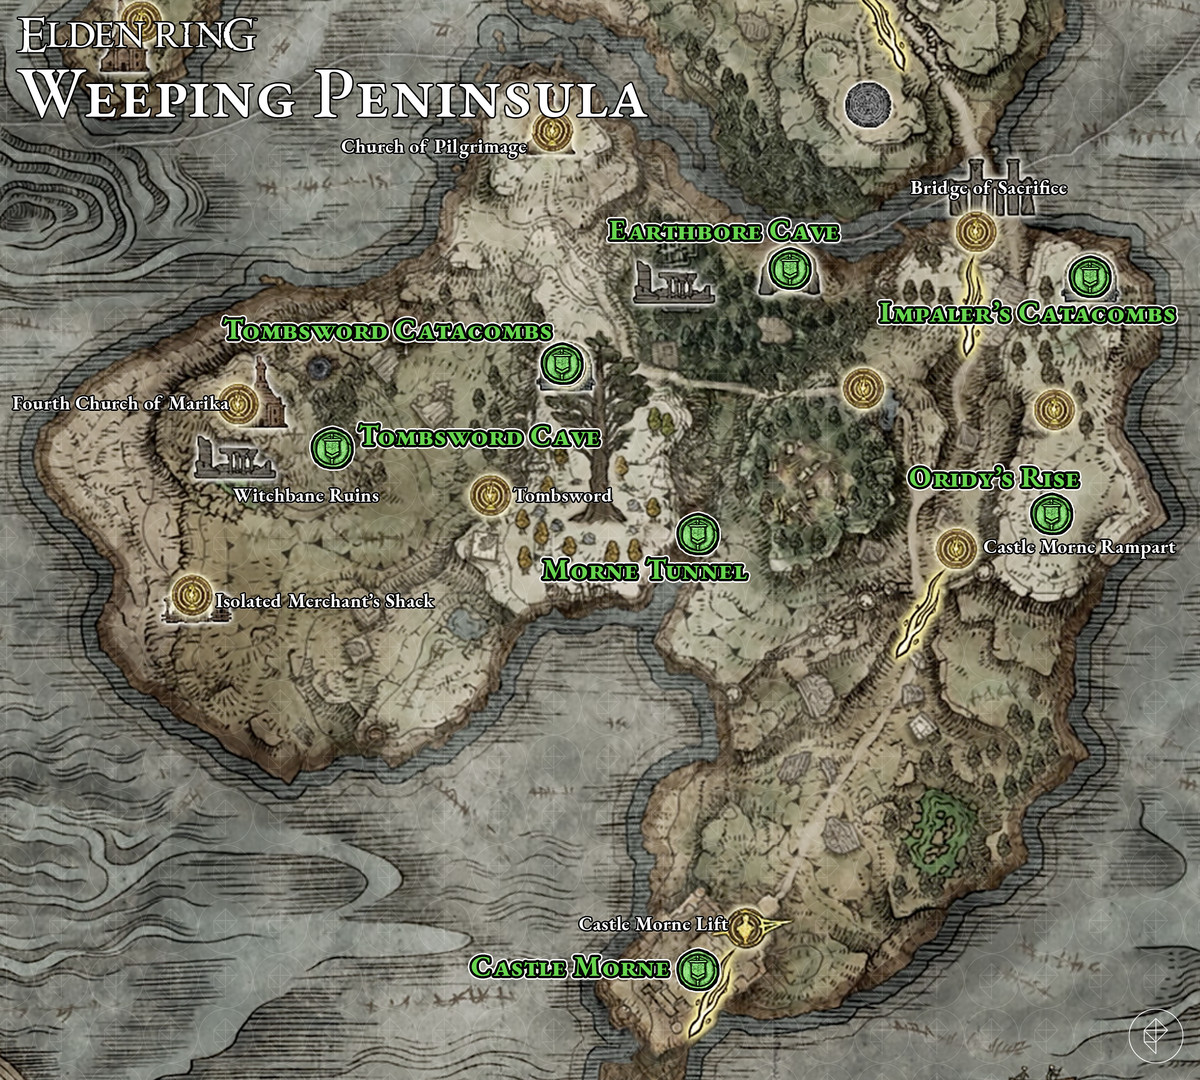 Elden Ring map showing the location of each dungeon in the Weeping Peninsula